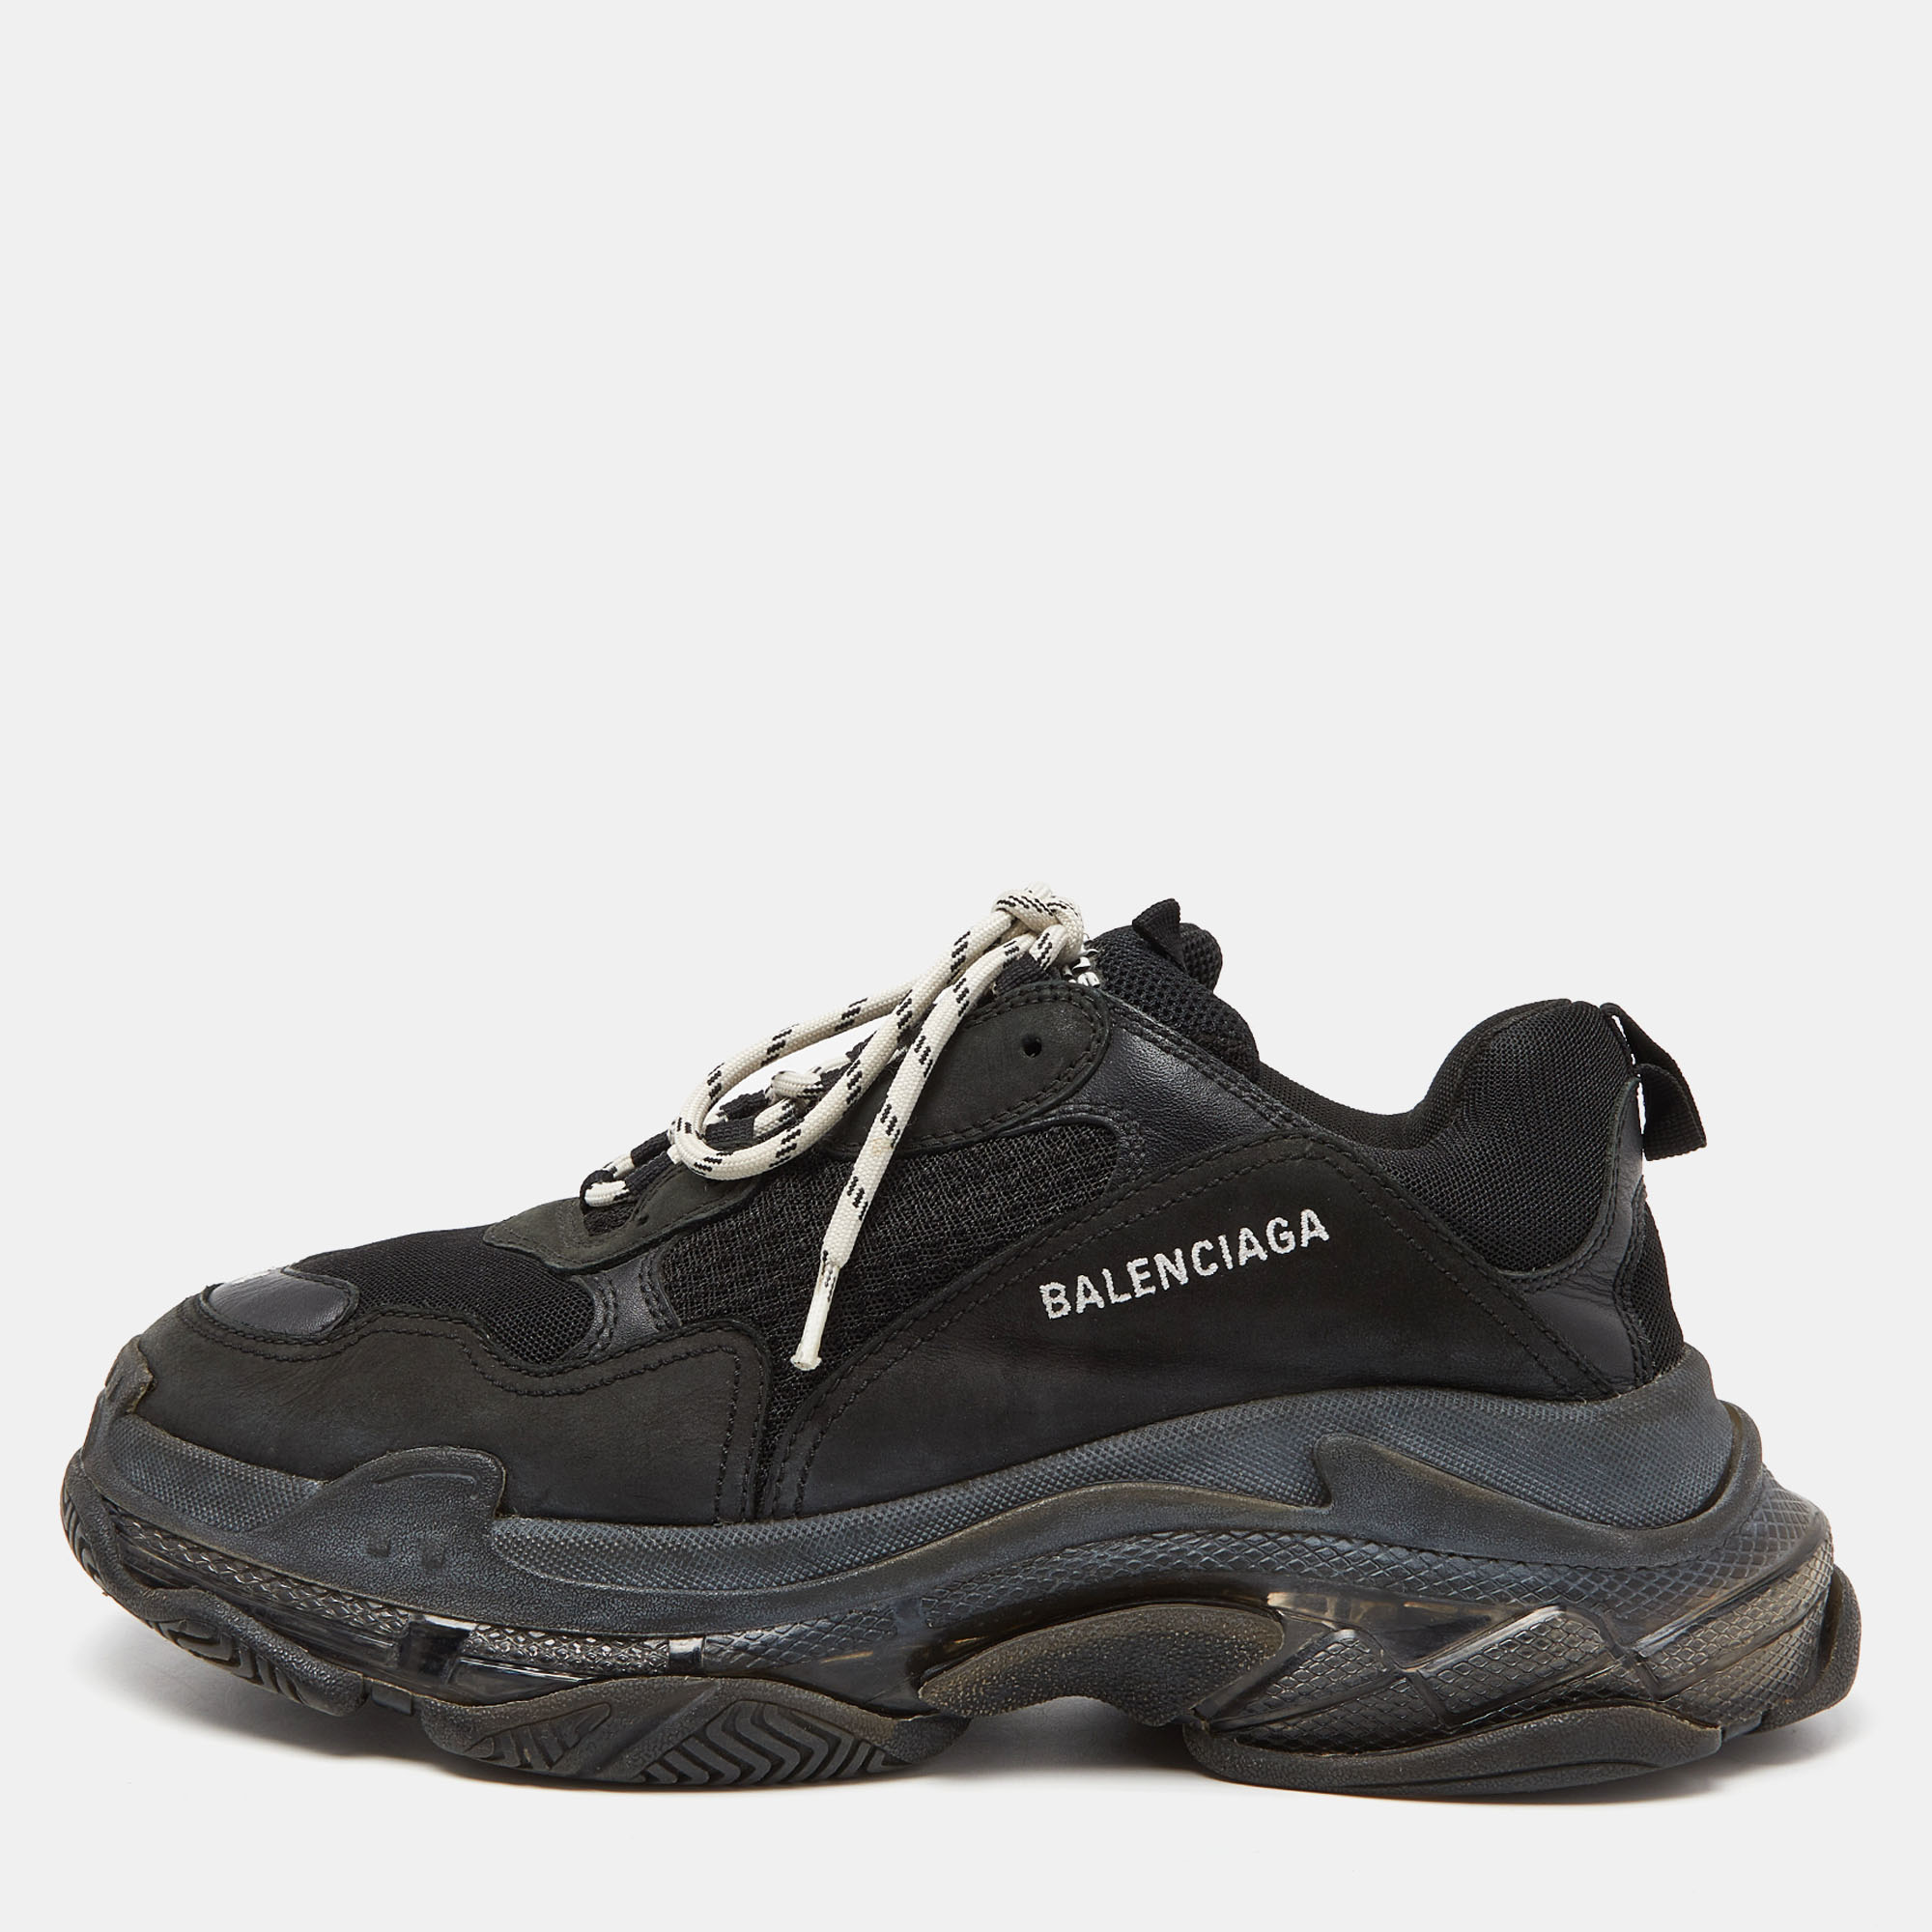 Balenciaga Black Nubuck Leather And Mesh Triple S Low Top Sneakers Size 44